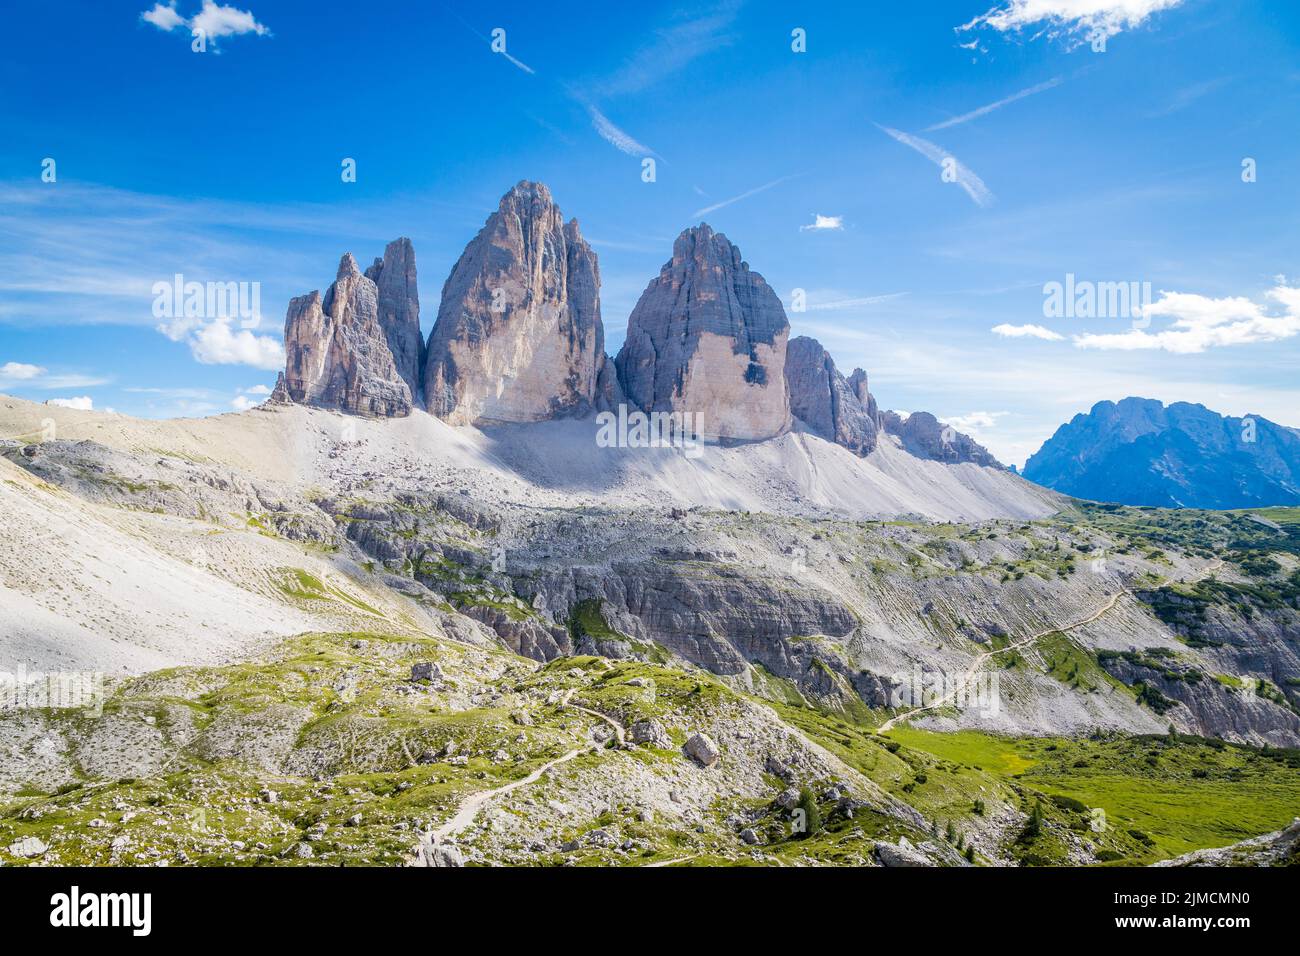 Three Peaks, North faces, Dolomites, South Tyrol, Italy, Europe Stock Photo